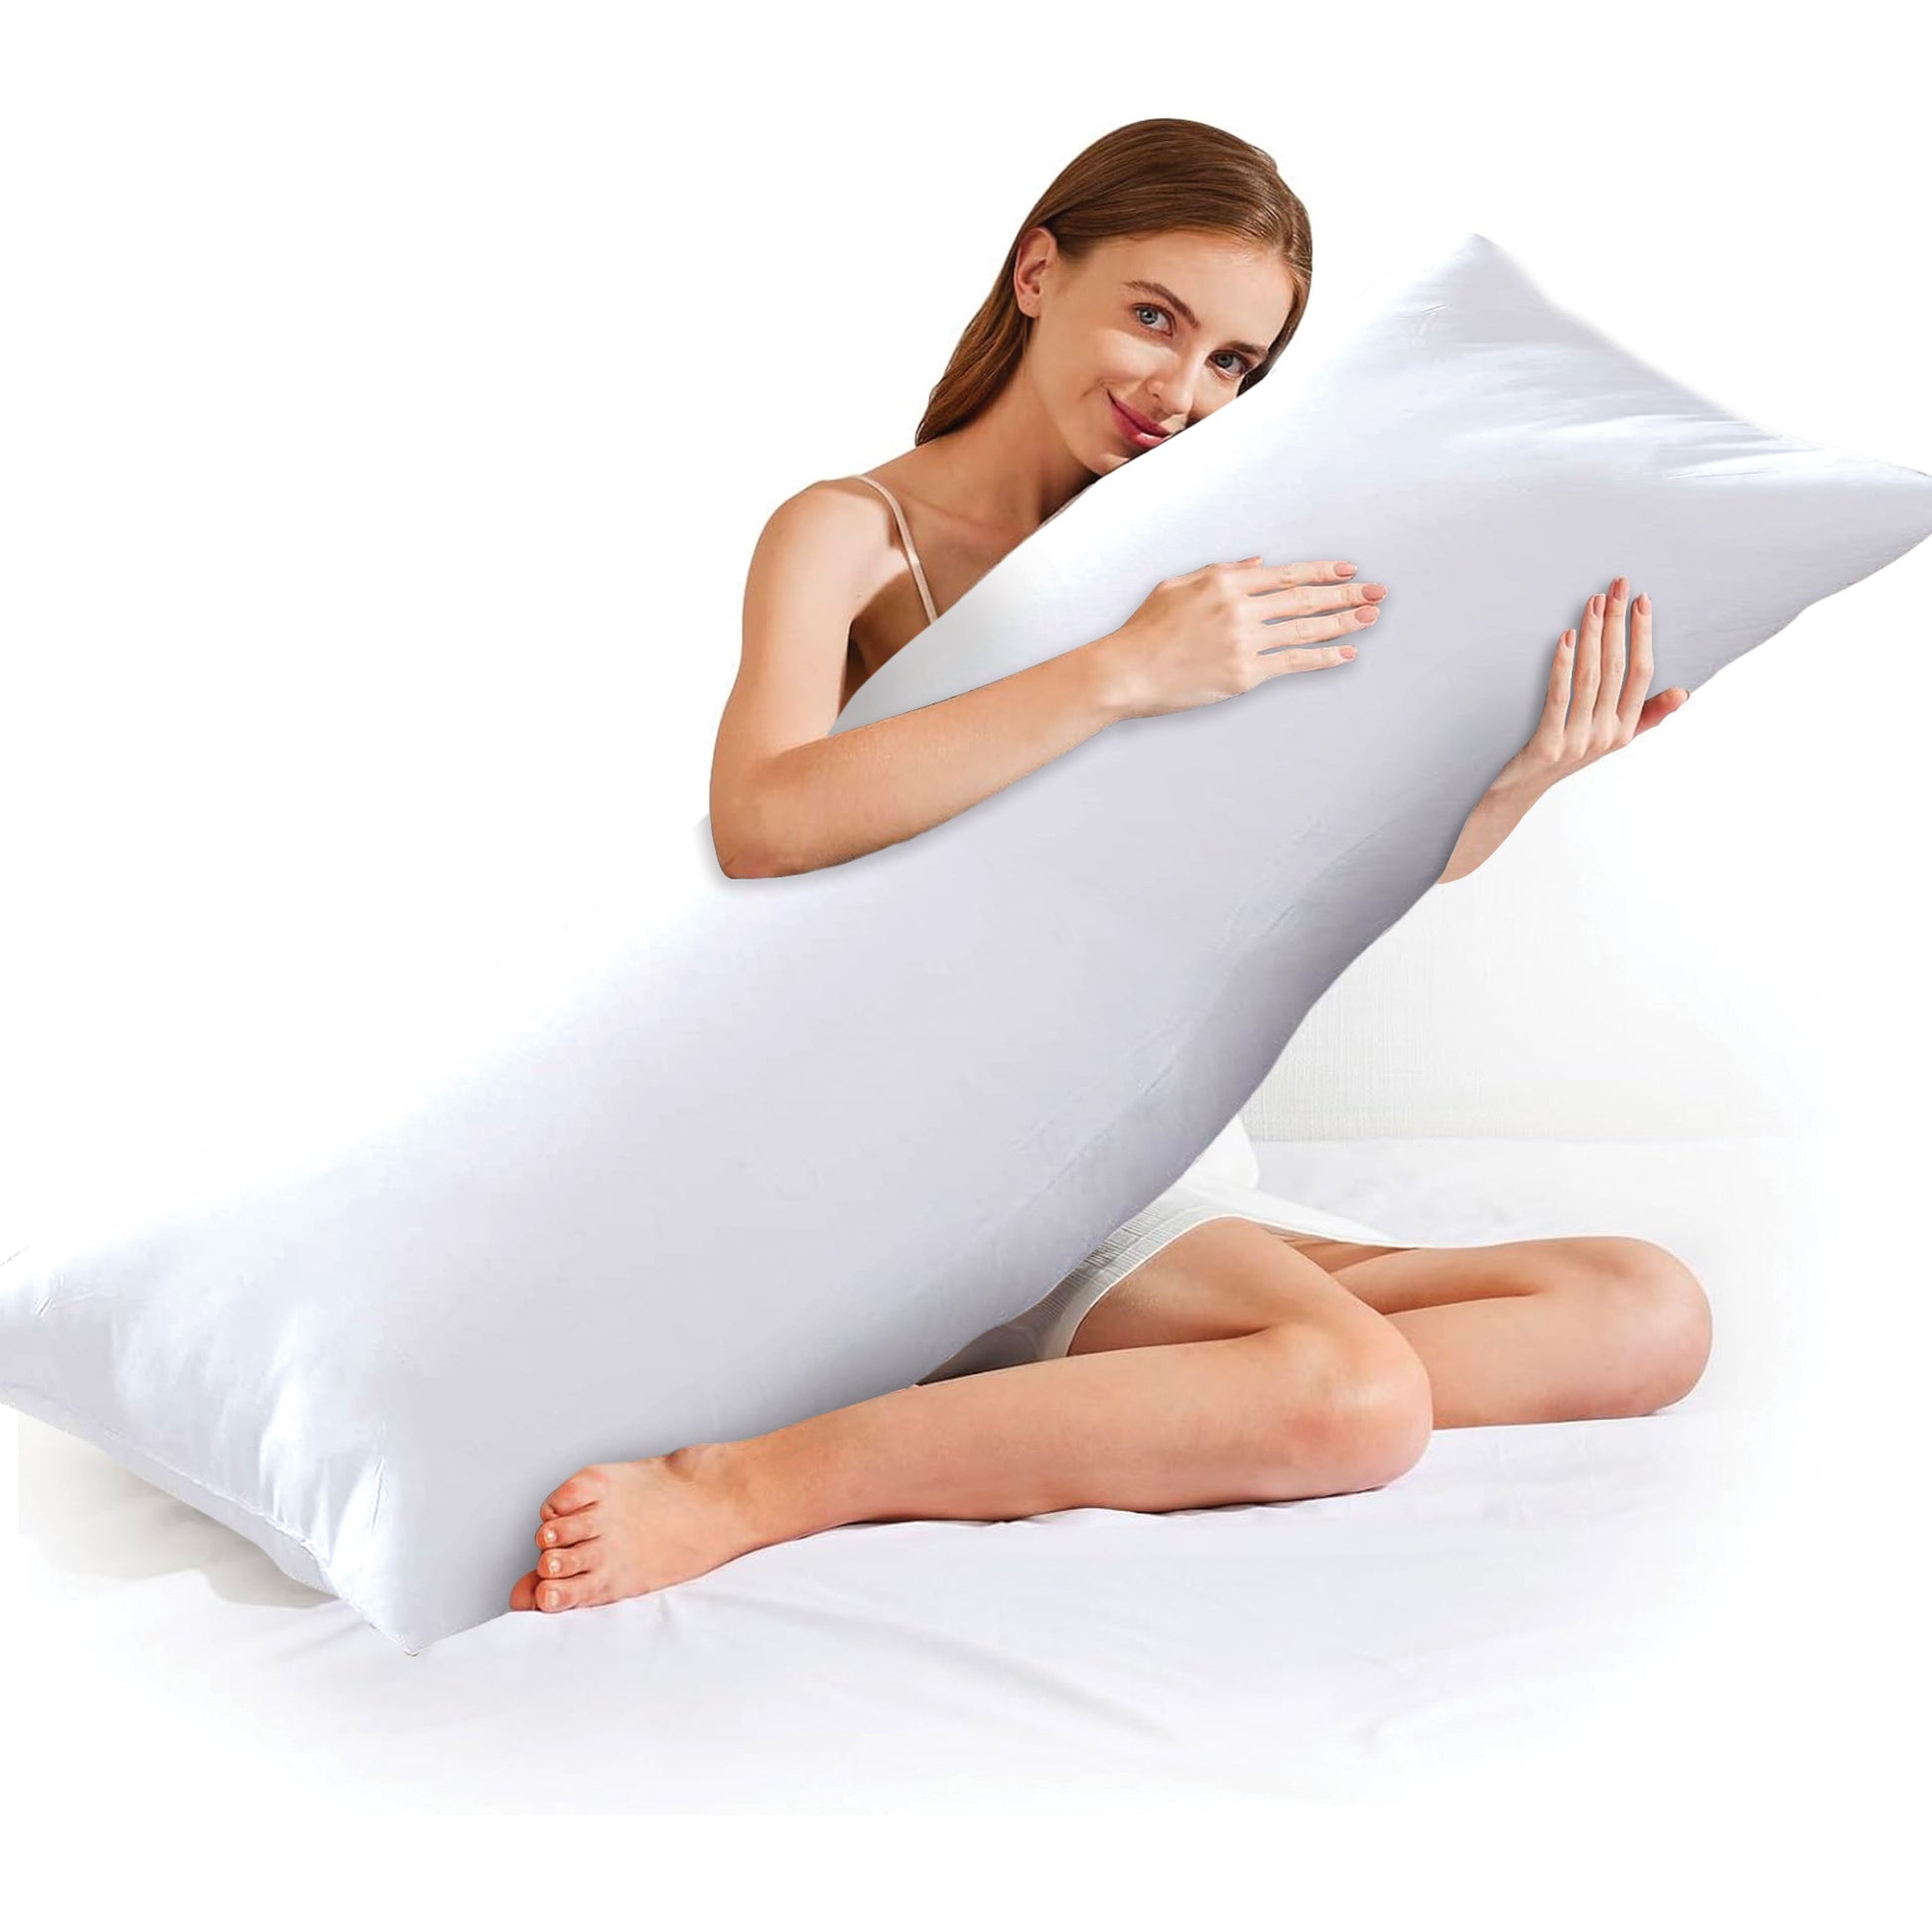 Gracefully cradling a body pillow, the woman enjoys the plush comfort of its 10% down and 90% feather blend, promising a tranquil and rejuvenating sleep.